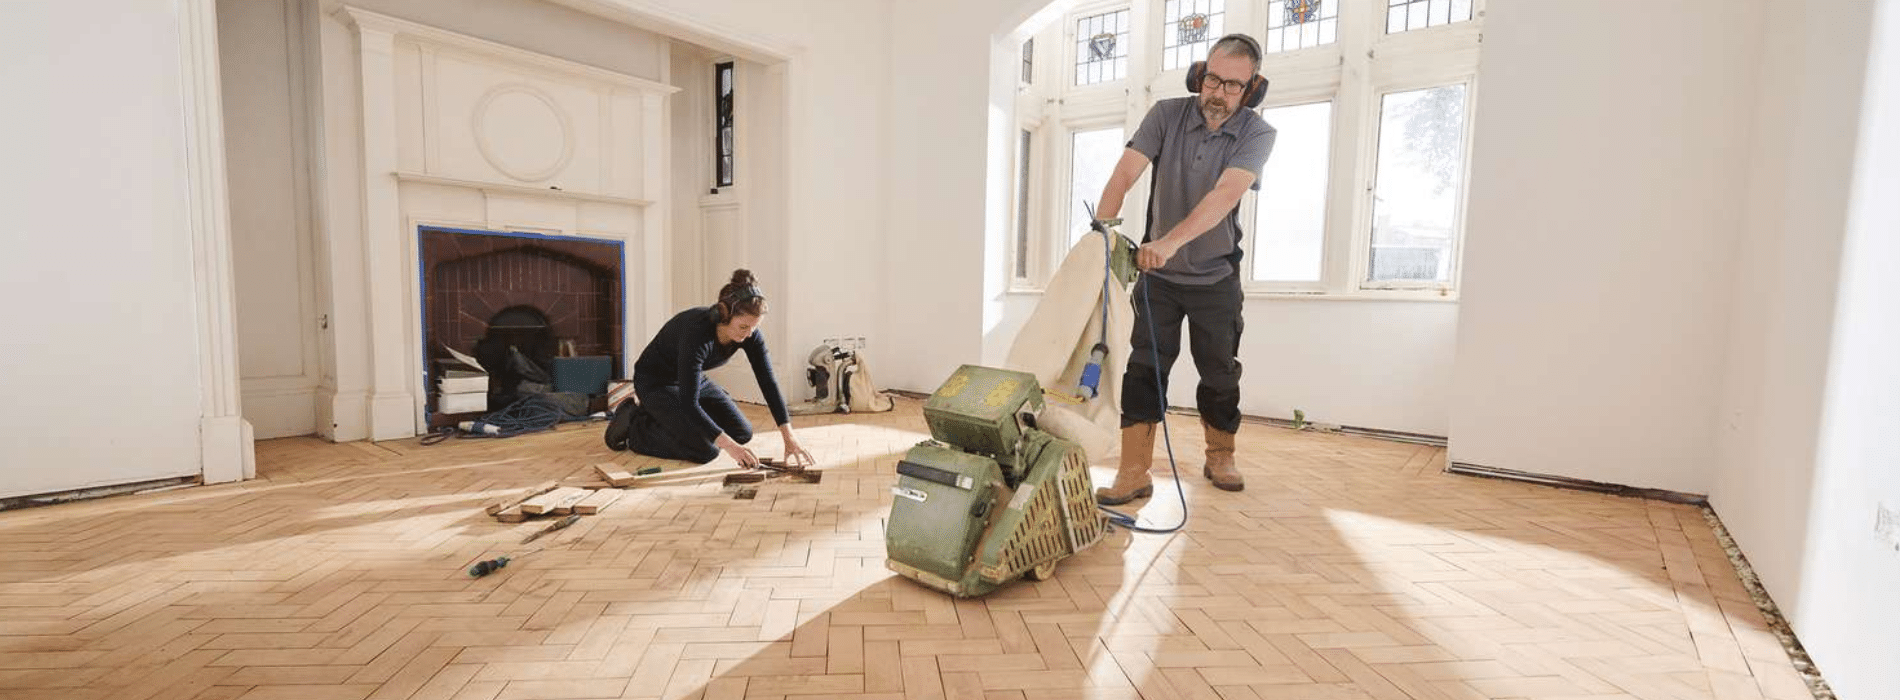 In Bethnal Green, E2, Mr Sander® are using a Bona Scorpion, a 200mm drum sander with 1.5 kW power, 240V voltage, and 50 Hz frequency. The sander is connected to a dust extraction system with a HEPA filter, ensuring a clean and efficient result while sanding a herringbone floor. 